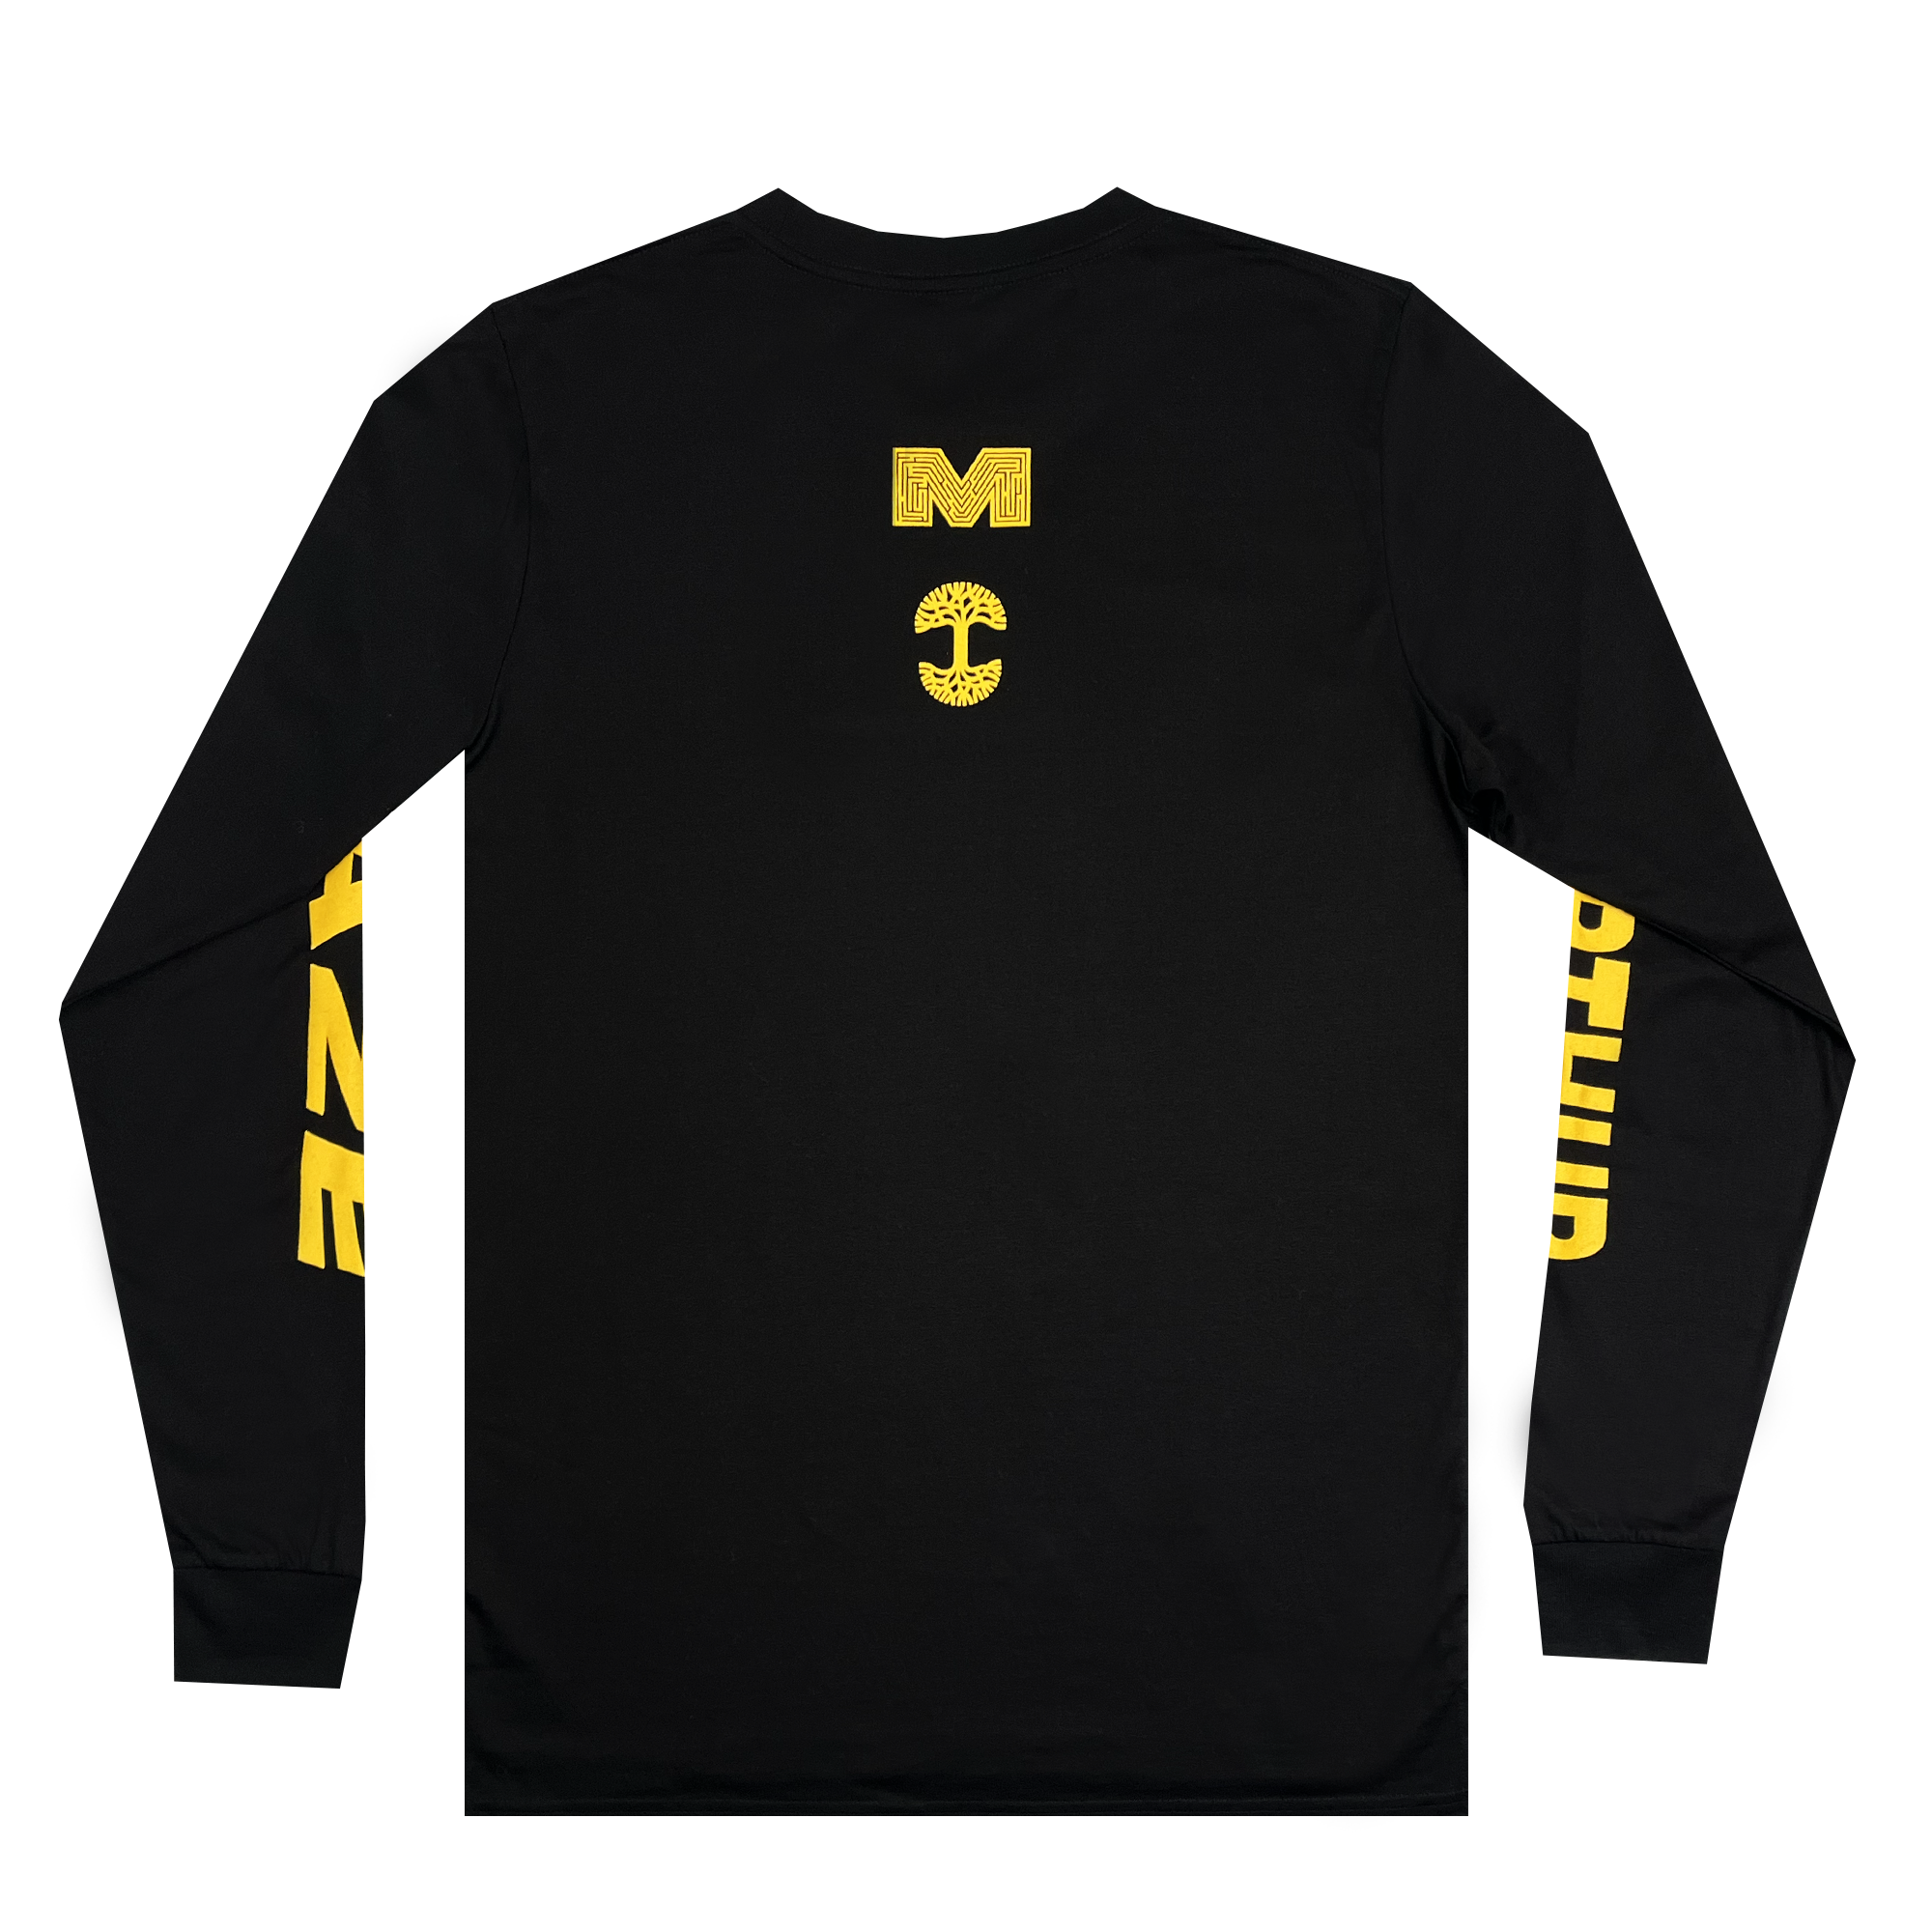 Back view of long sleeve black t-shirt with yellow Macarthur Maze logo and Oaklandish tree logo.